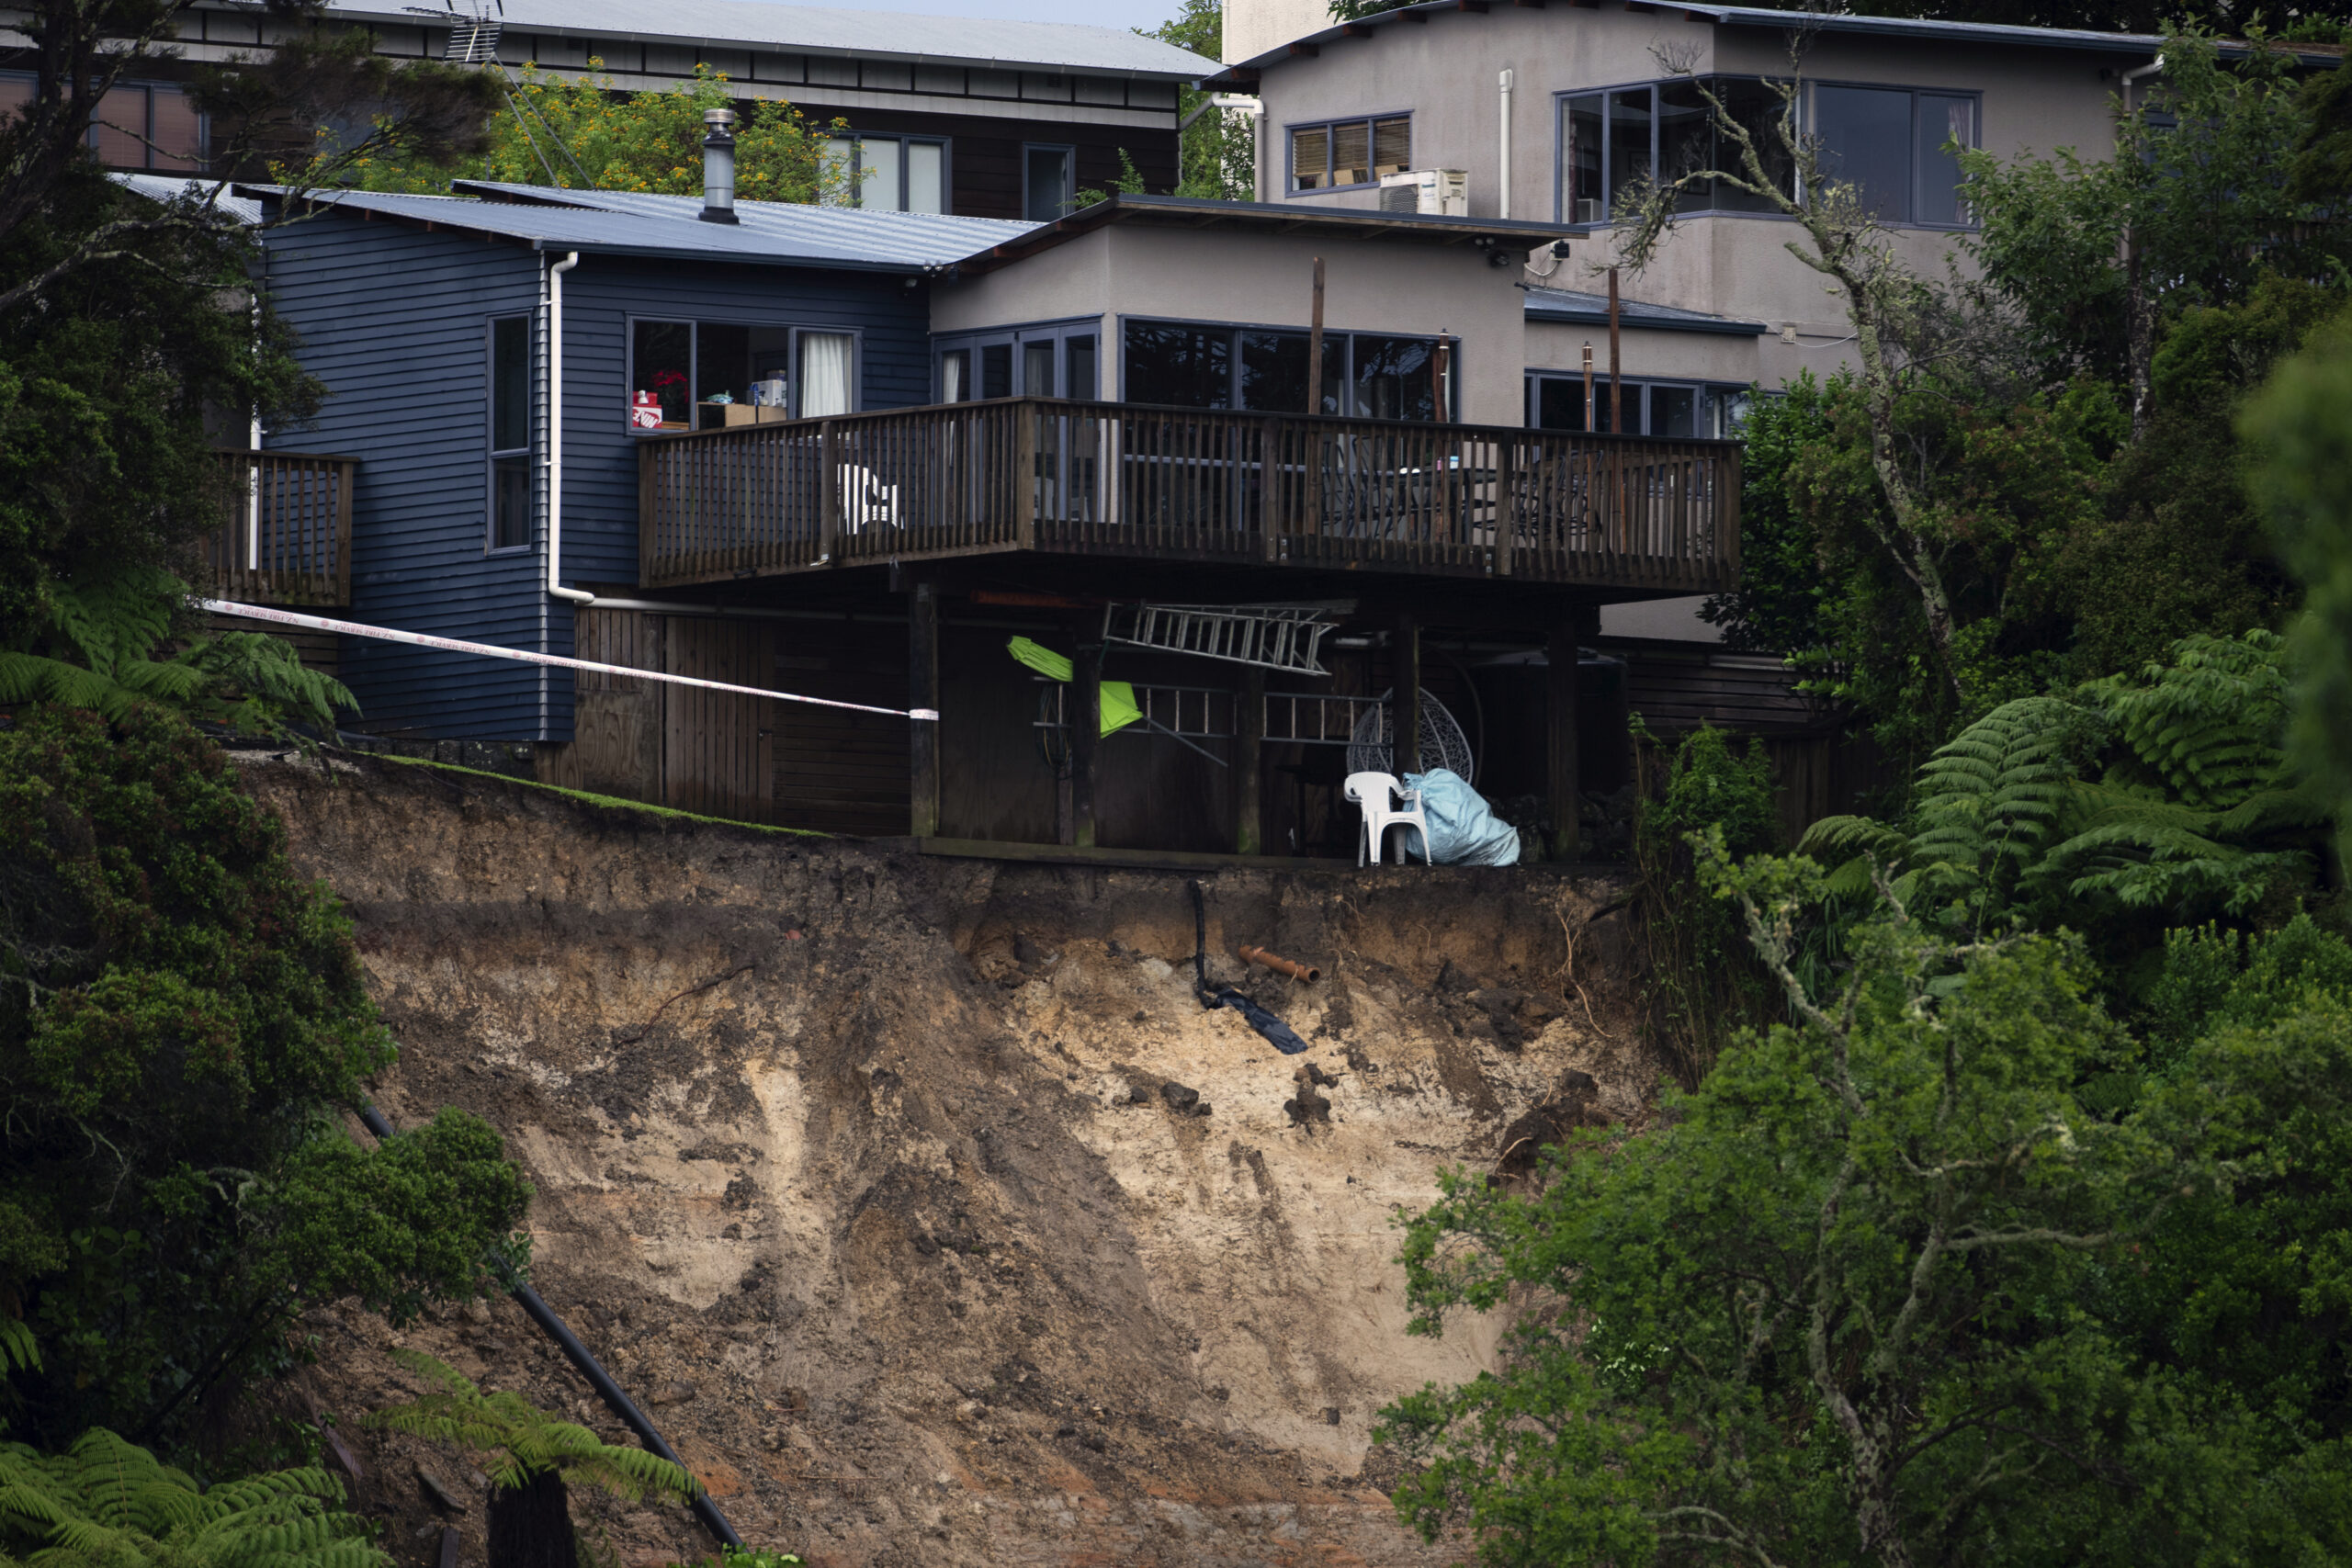 New Zealand Braces for Cyclone Gabrielle, Just Days After Devastating Floods